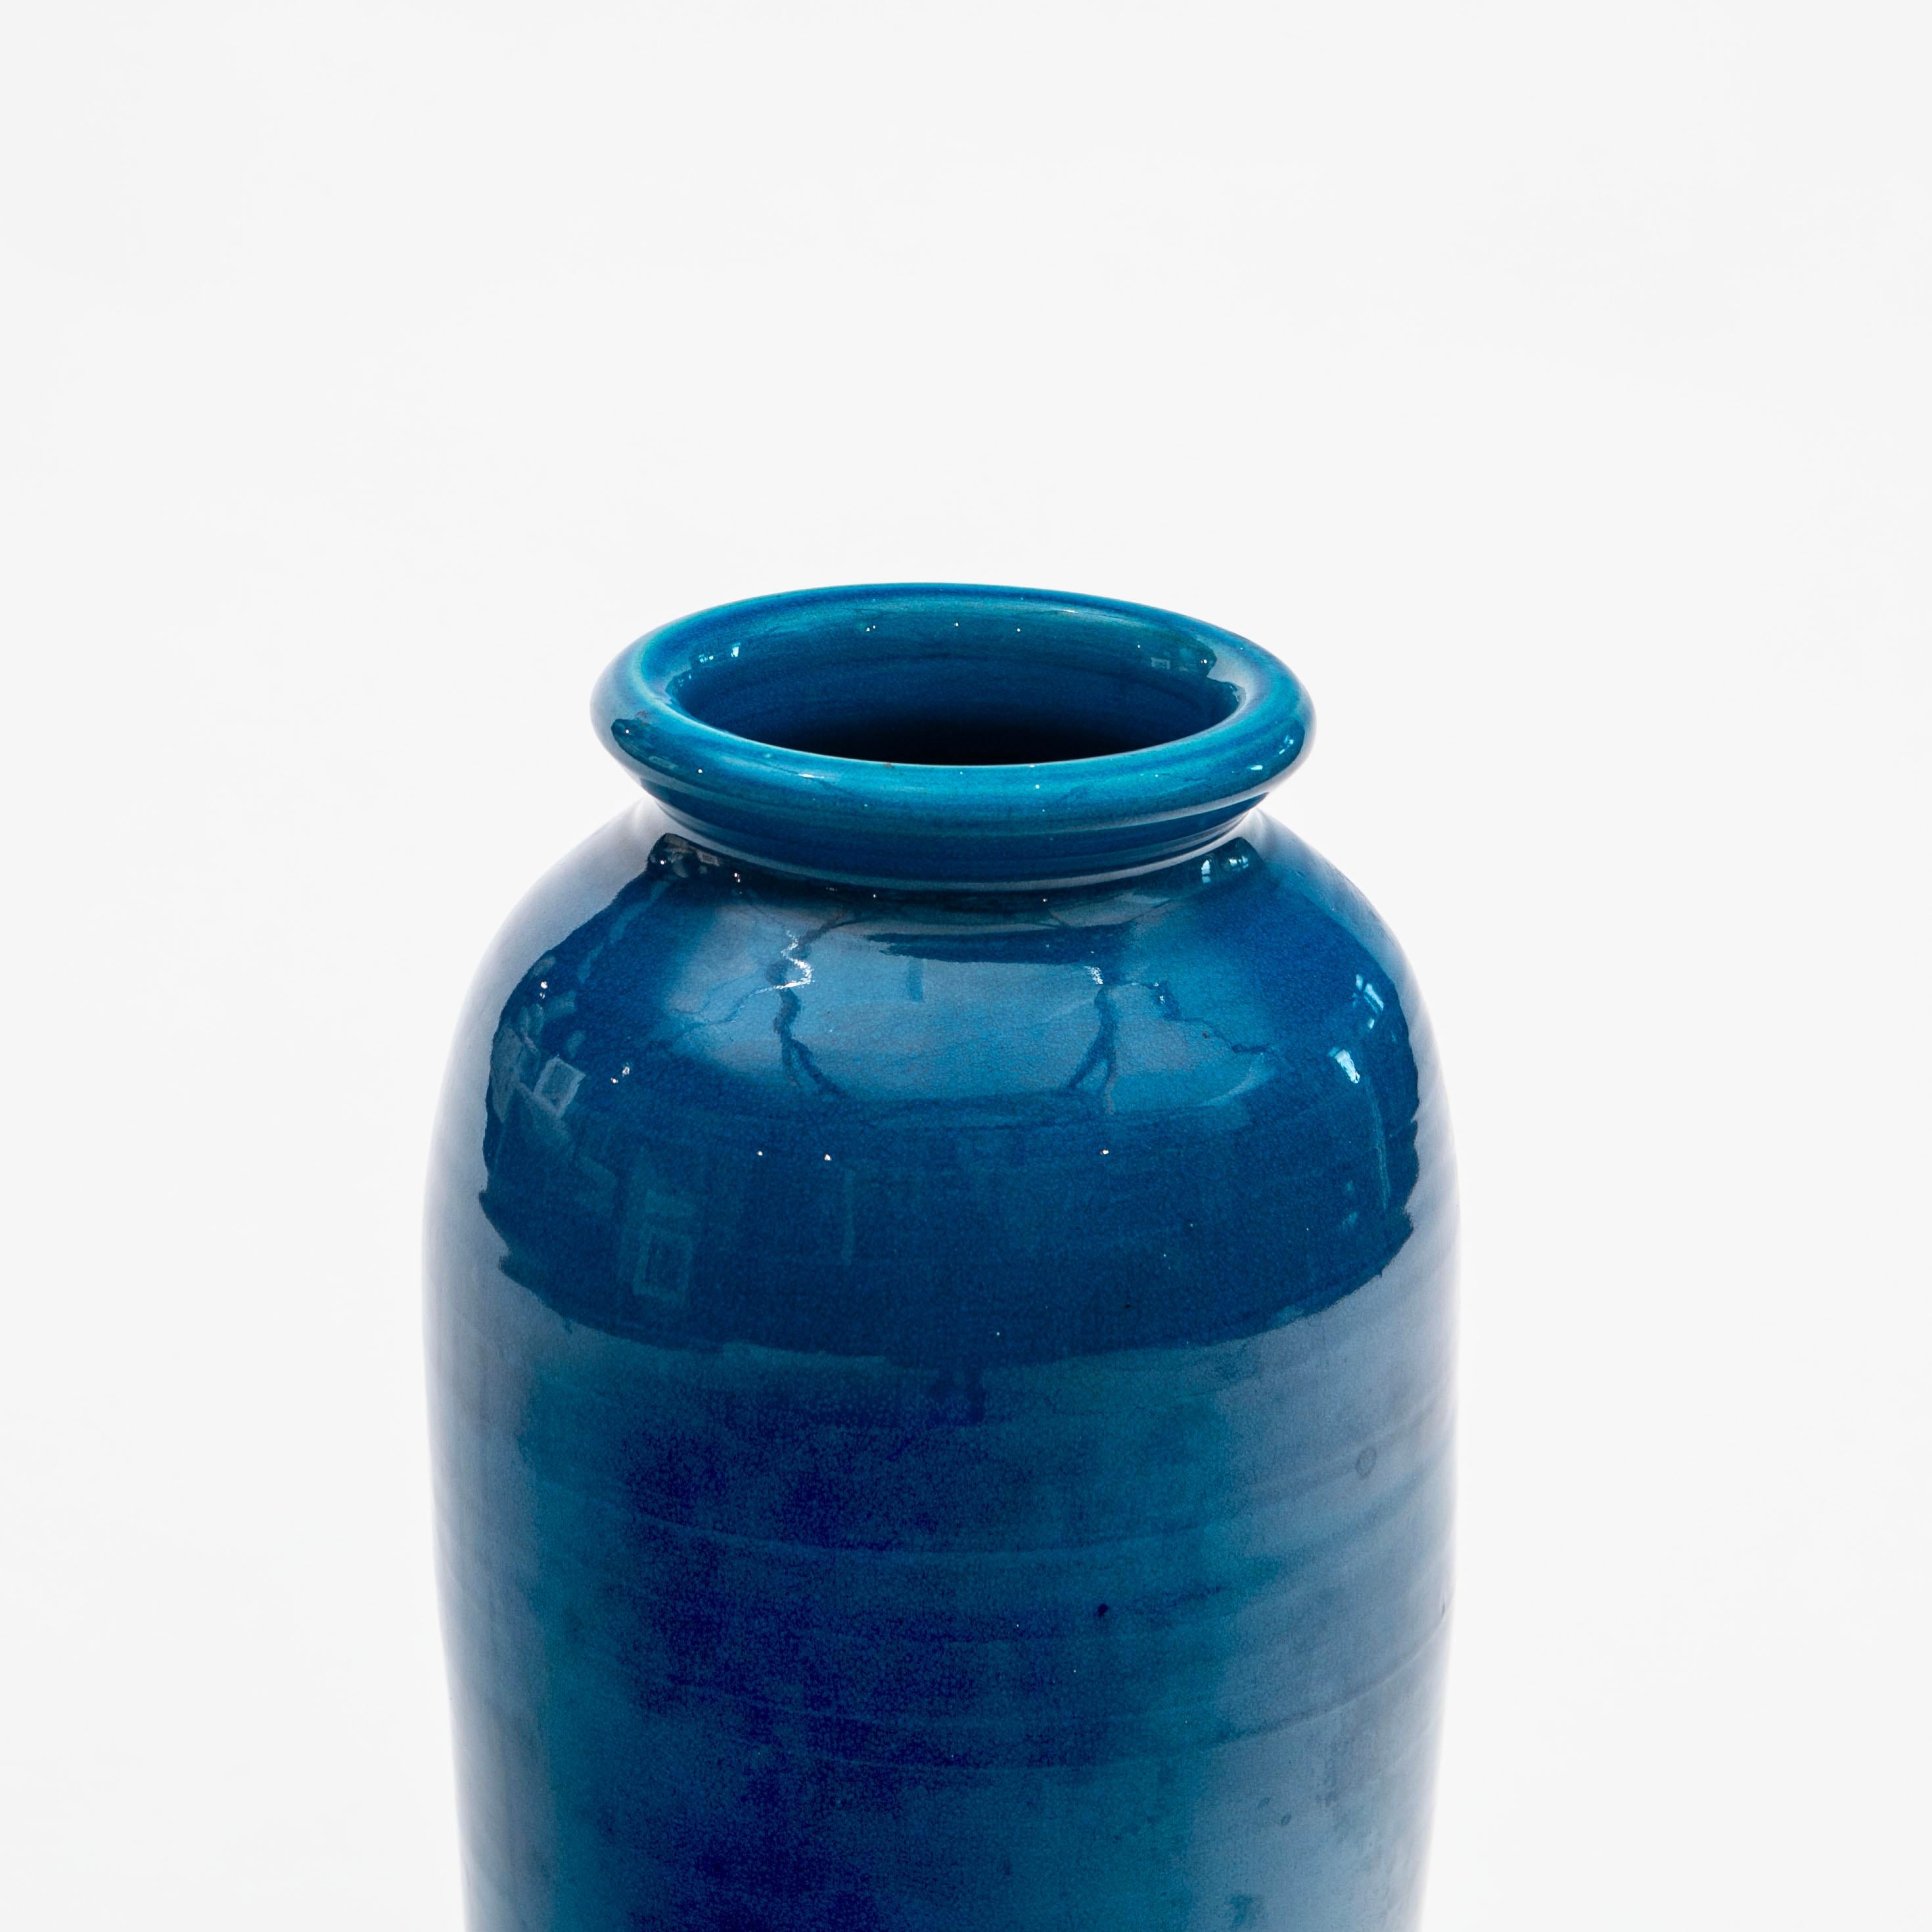 Tall stoneware floor vase with turquoise blue glaze manufactured by Kähler. H. 56 cm. Mouth opening 13 cm
Signed with manufacturer’s mark HAK engraved under the base (Hermann A. Kähler).

In great vintage condition.
Denmark 1920-1930